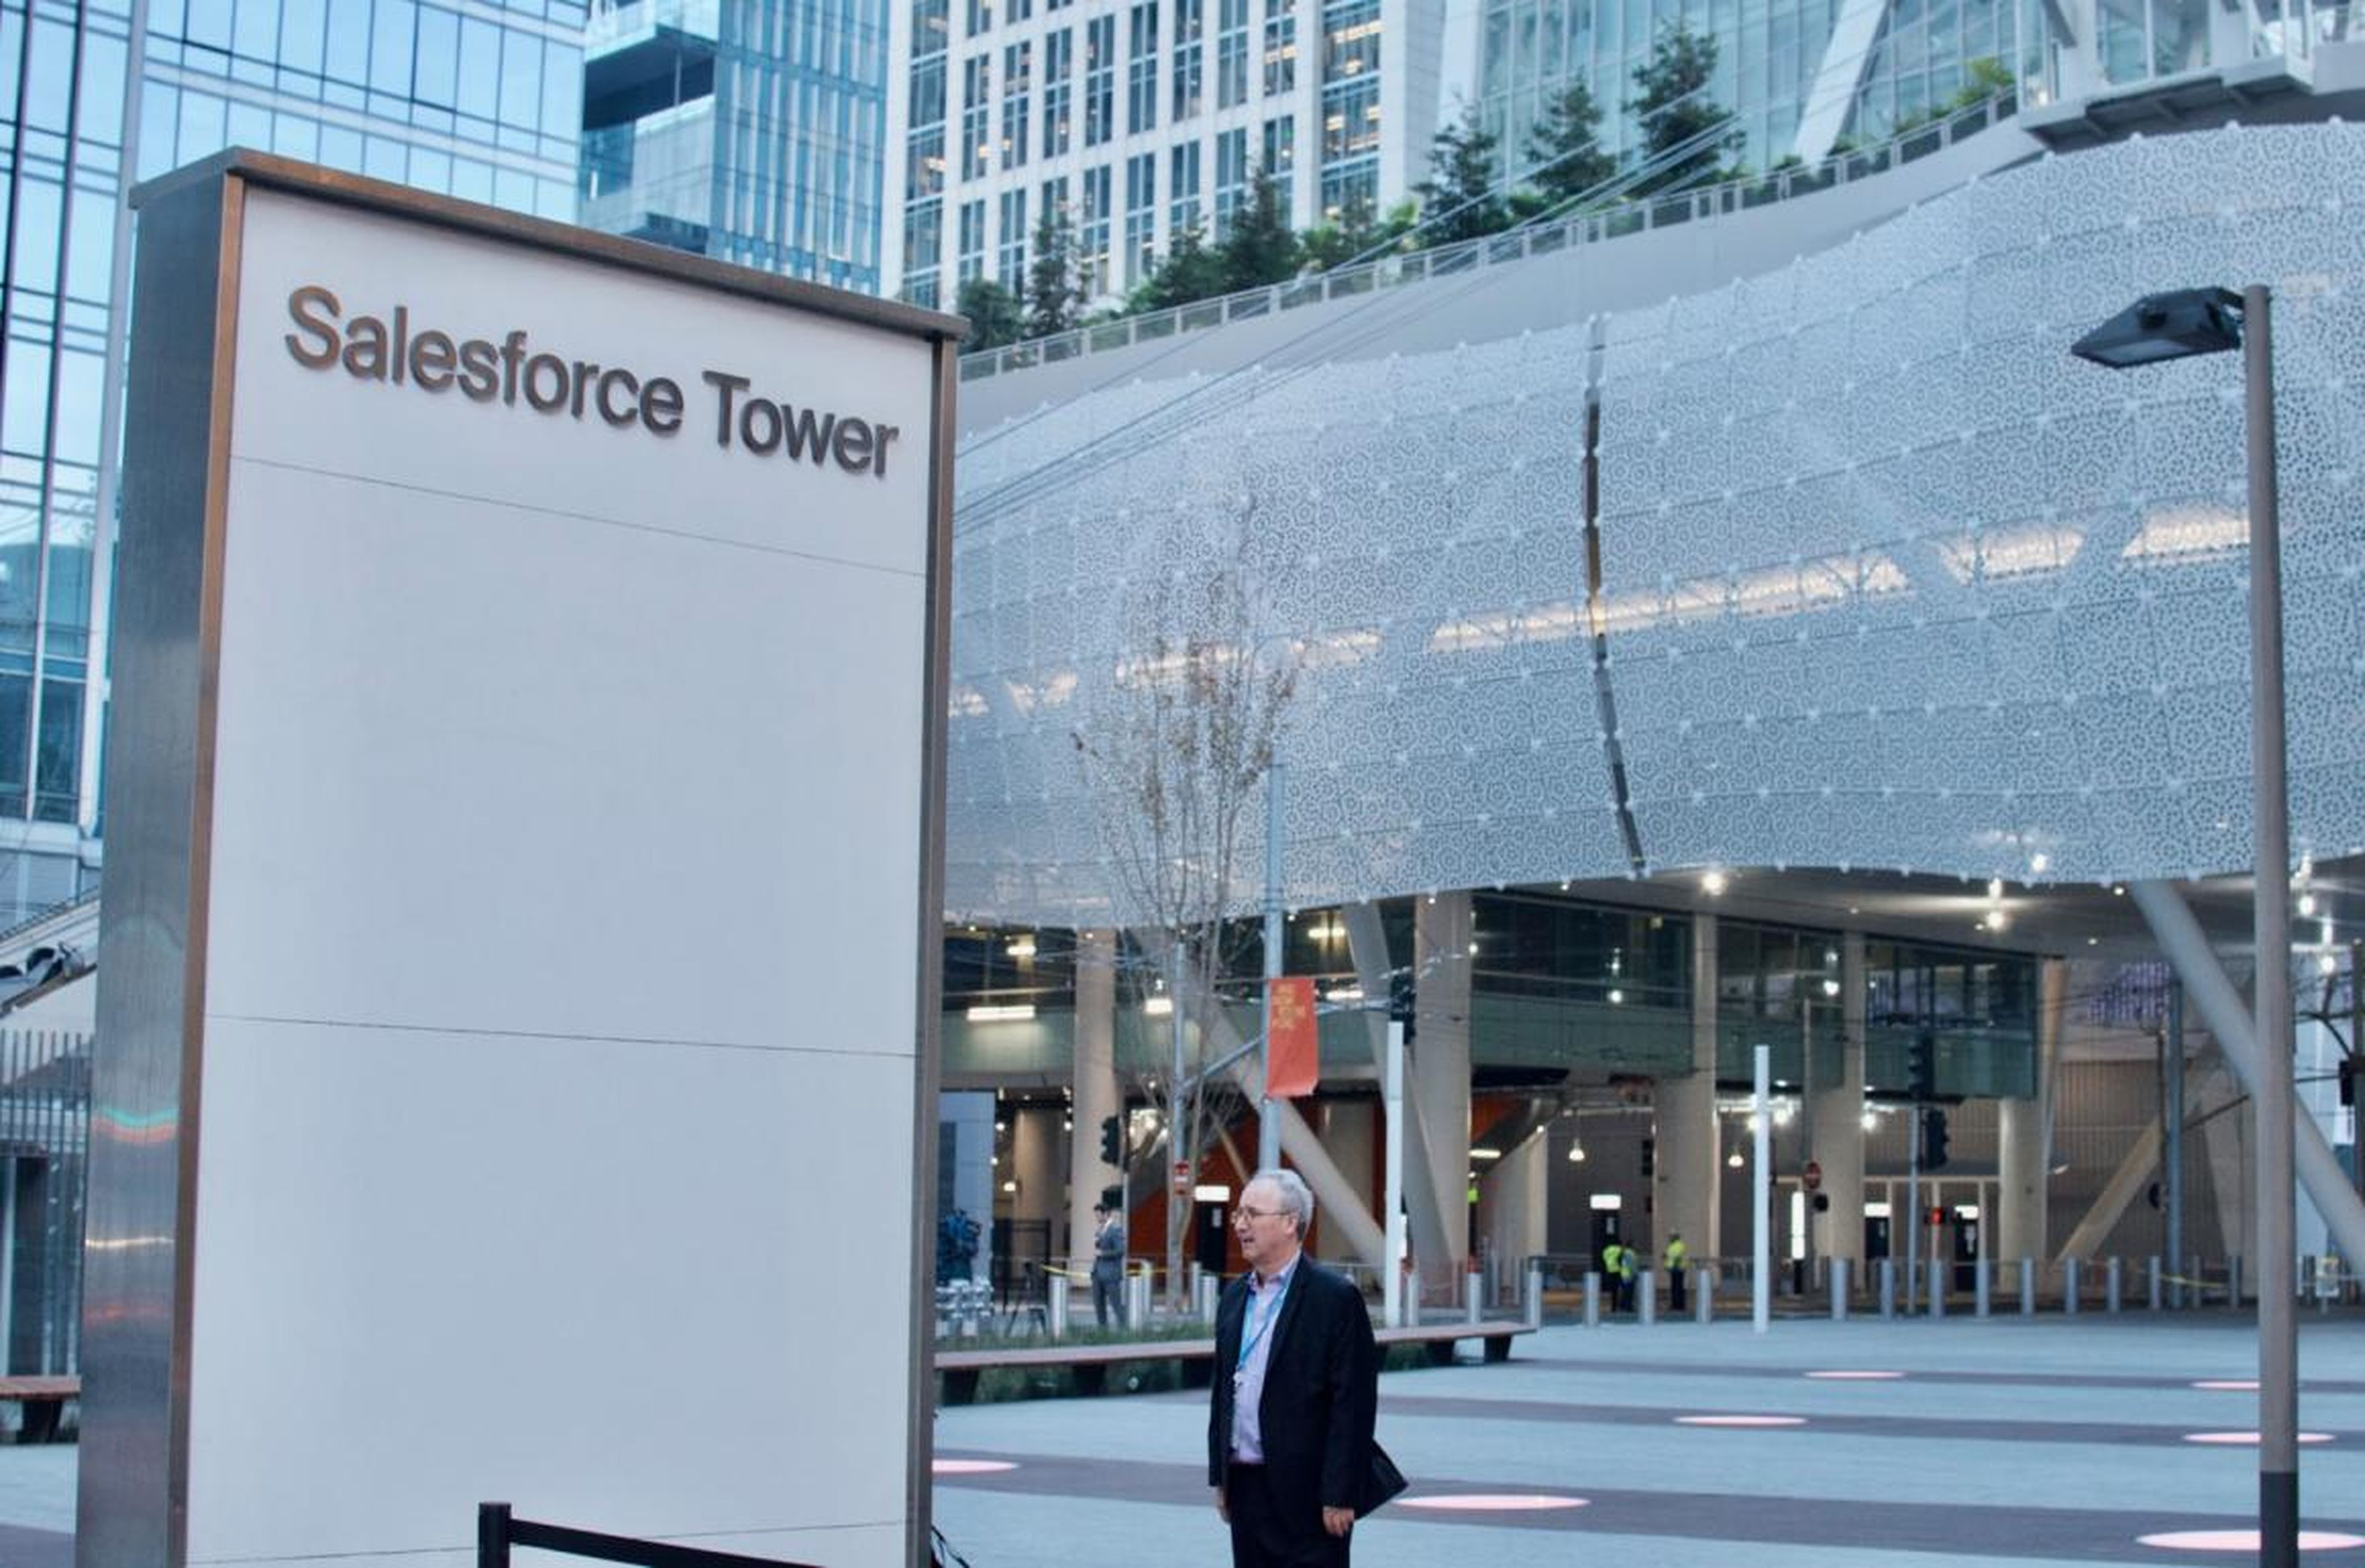 The reports kicked off a feud between the tower's developer, Millennium Partners, and the Transbay Joint Powers Authority.